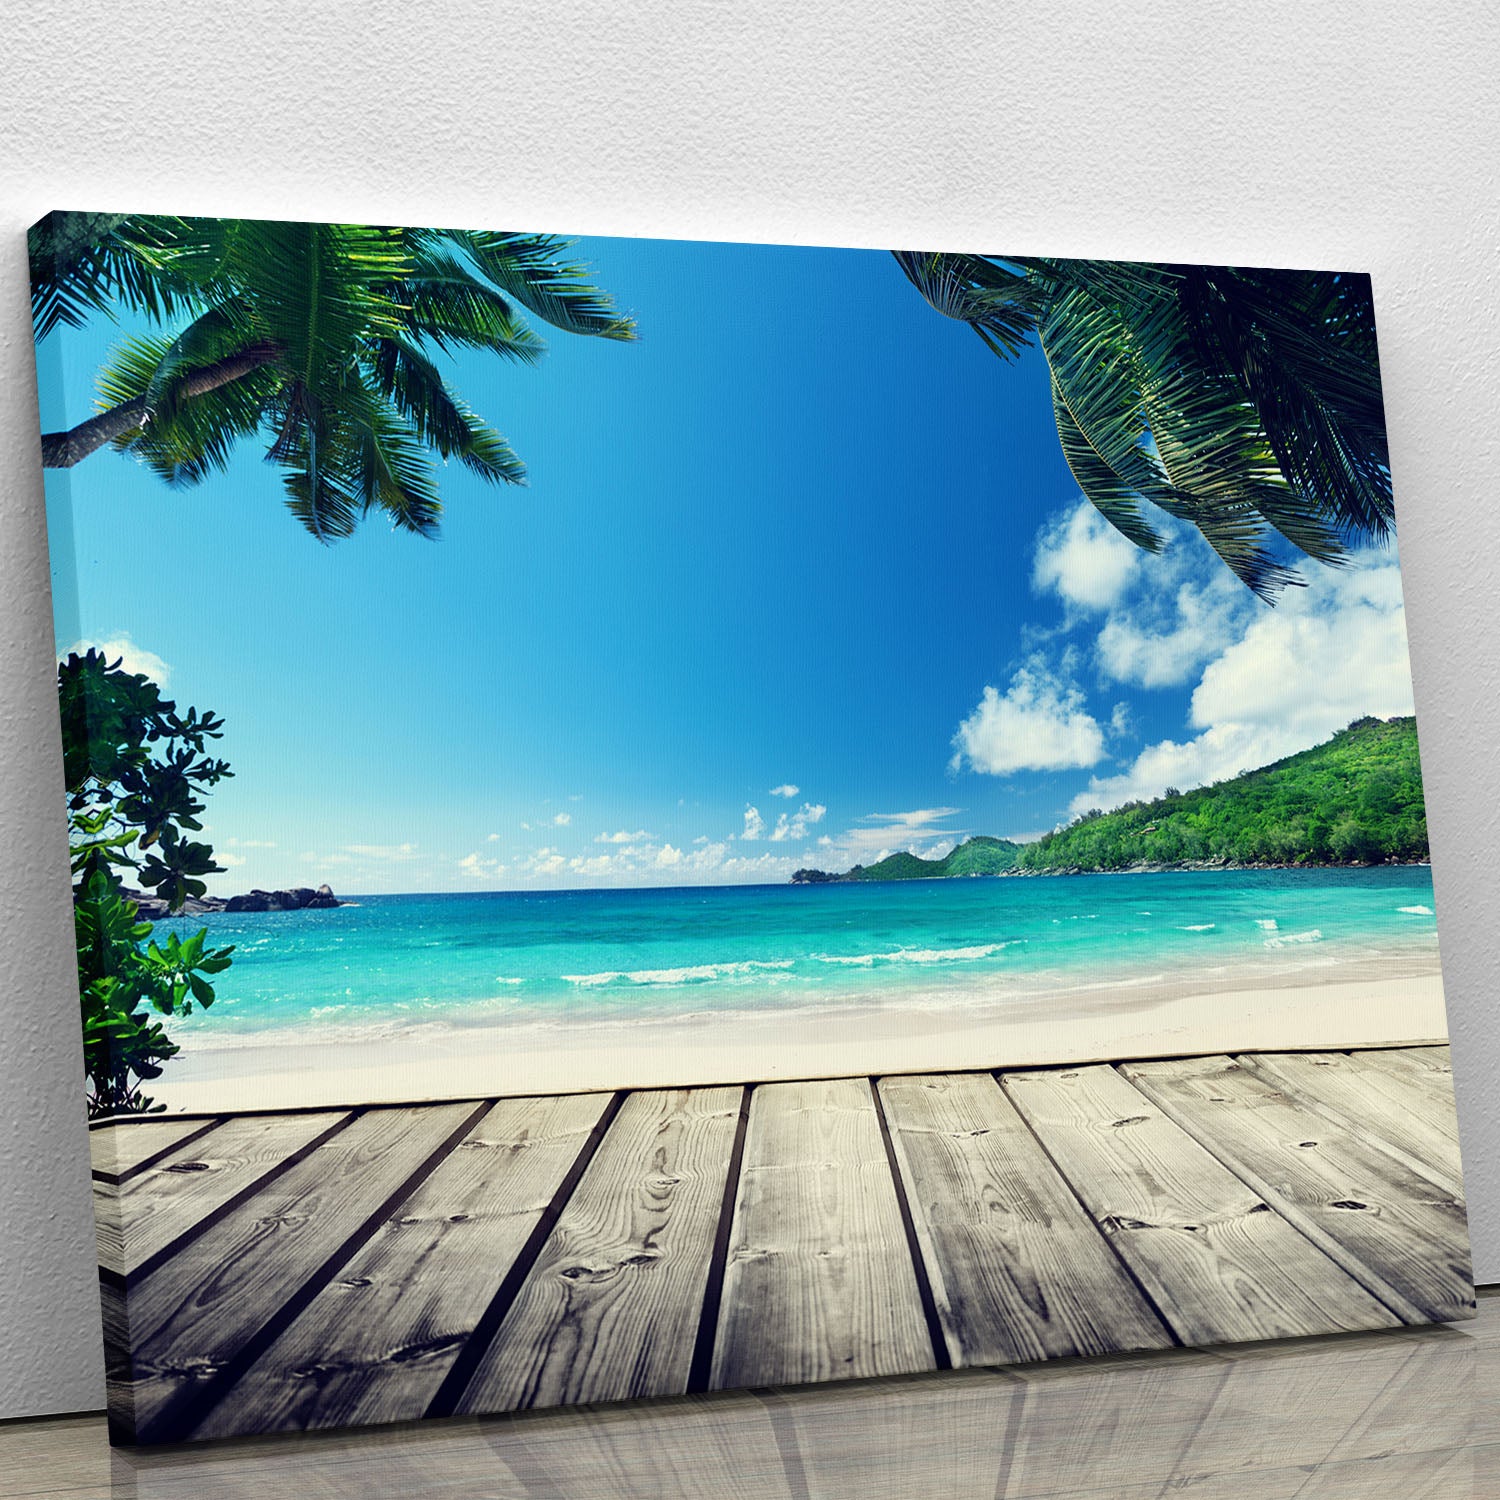 seychelles beach and wooden pier Canvas Print or Poster - Canvas Art Rocks - 1